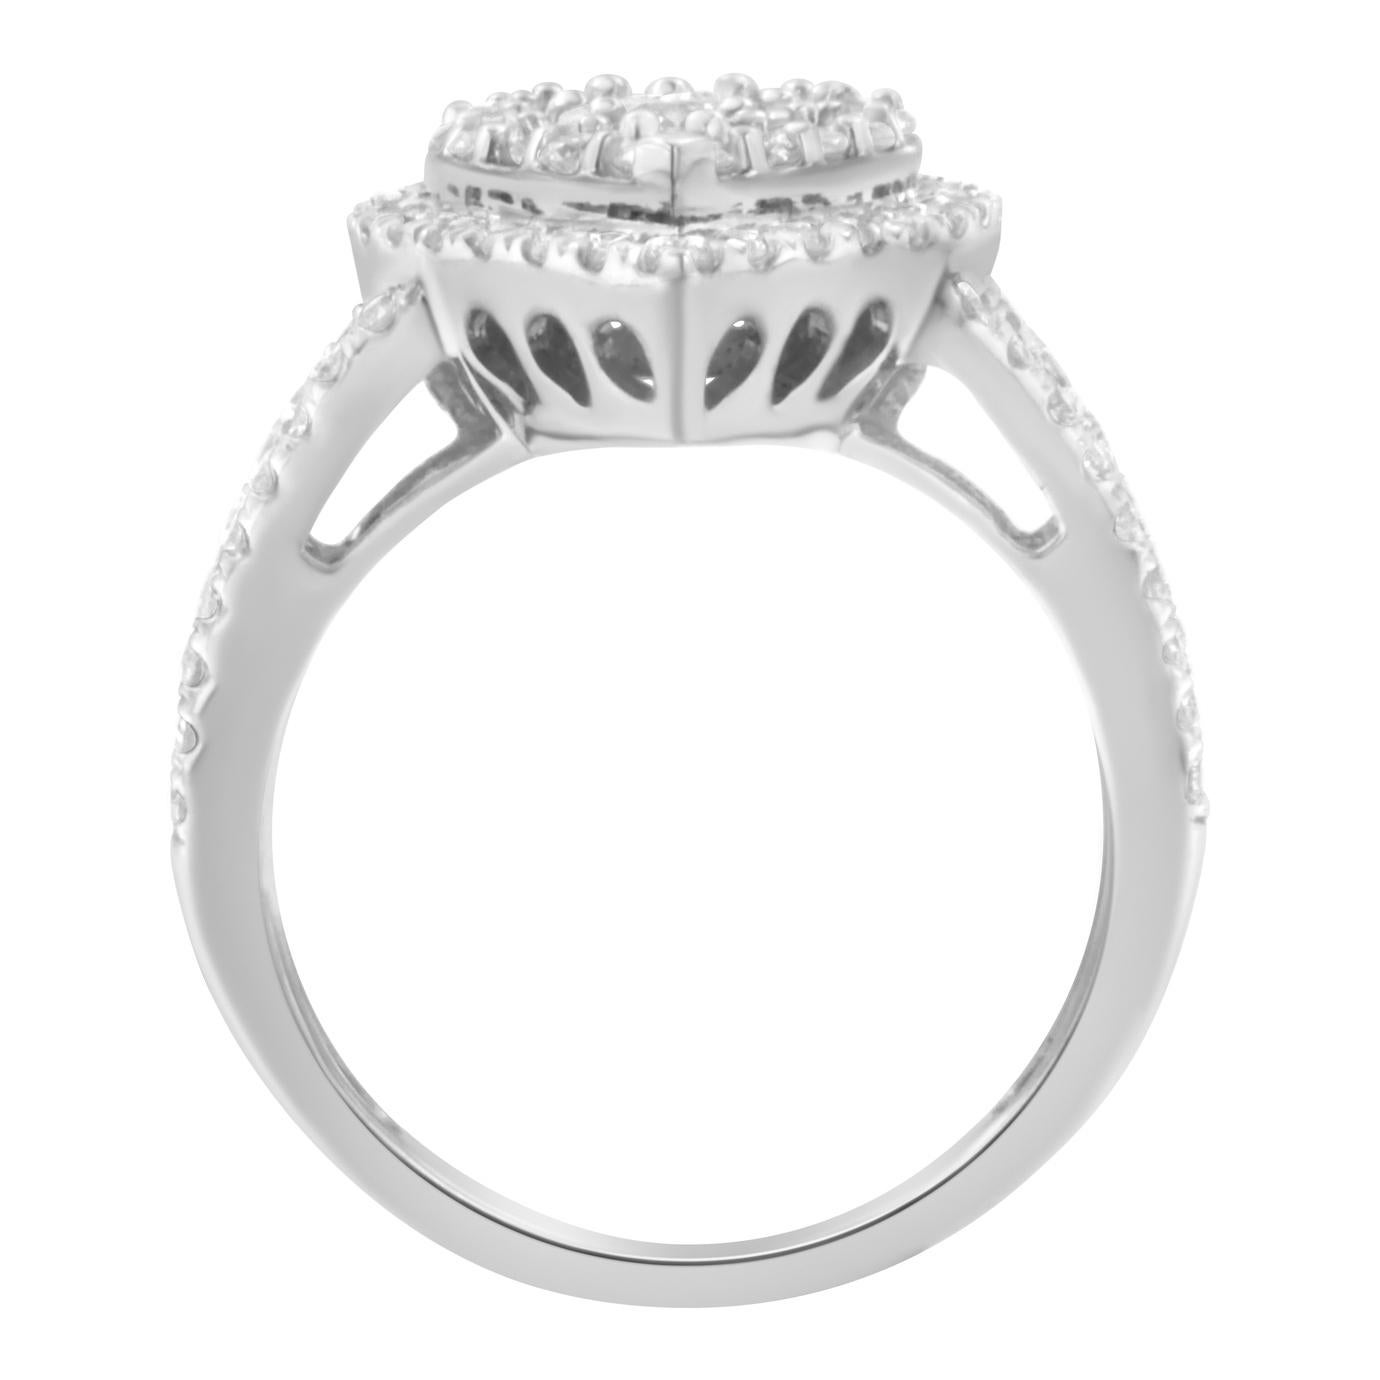 Round Cut .925 Sterling Silver 1 1/2 Cttw Diamond Cluster Ring (H-I Color, I1-I2 Clarity) For Sale